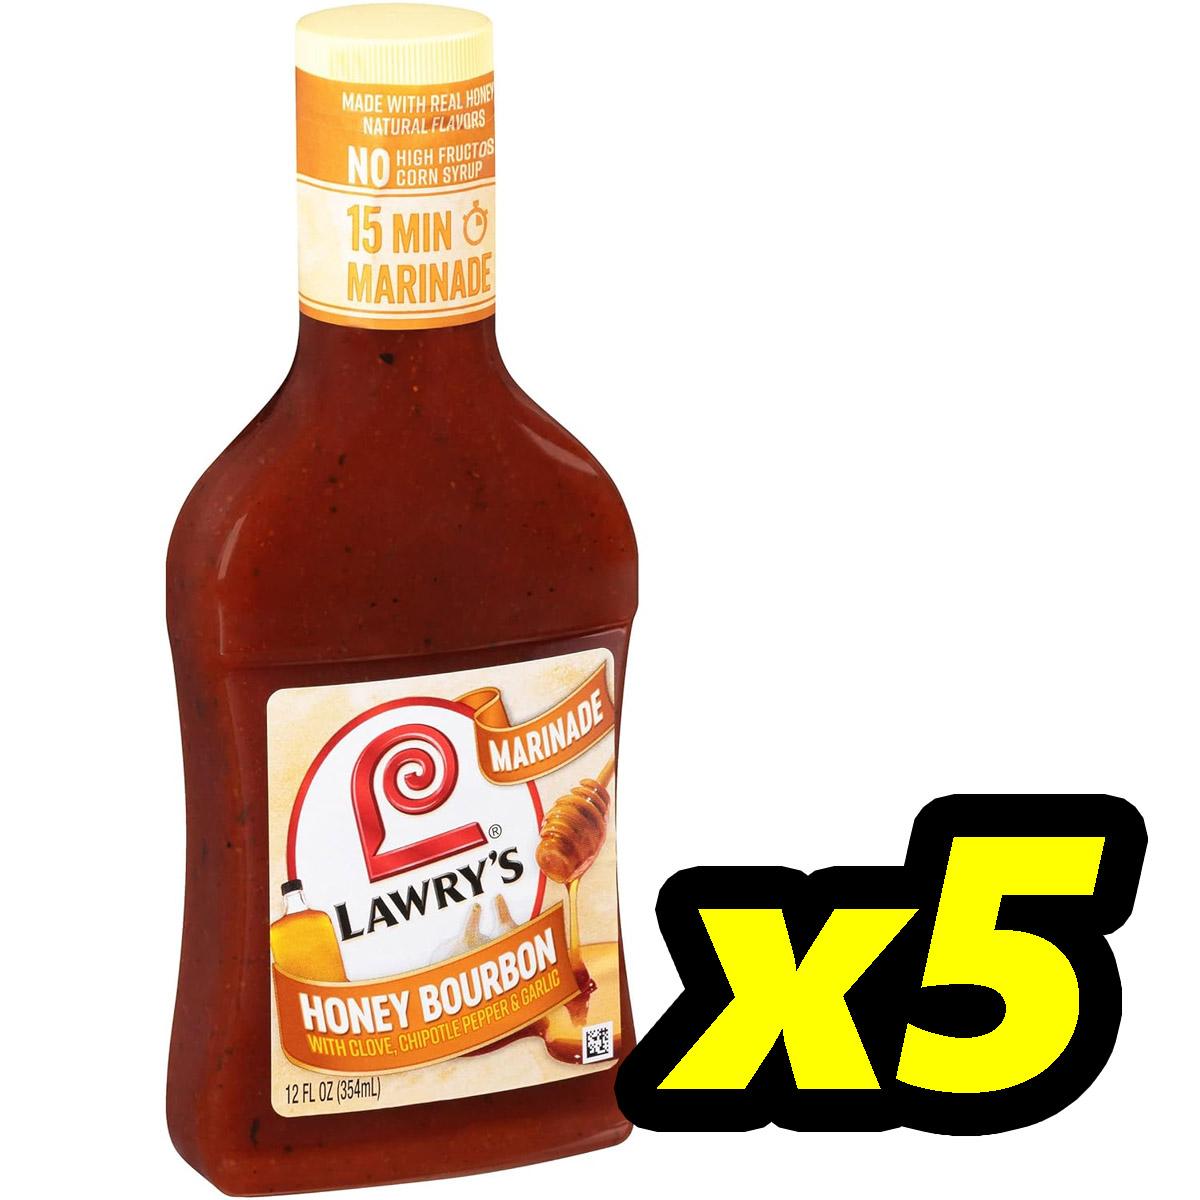 Lawrys Honey Bourbon with Clove 5 Pack for $9.20